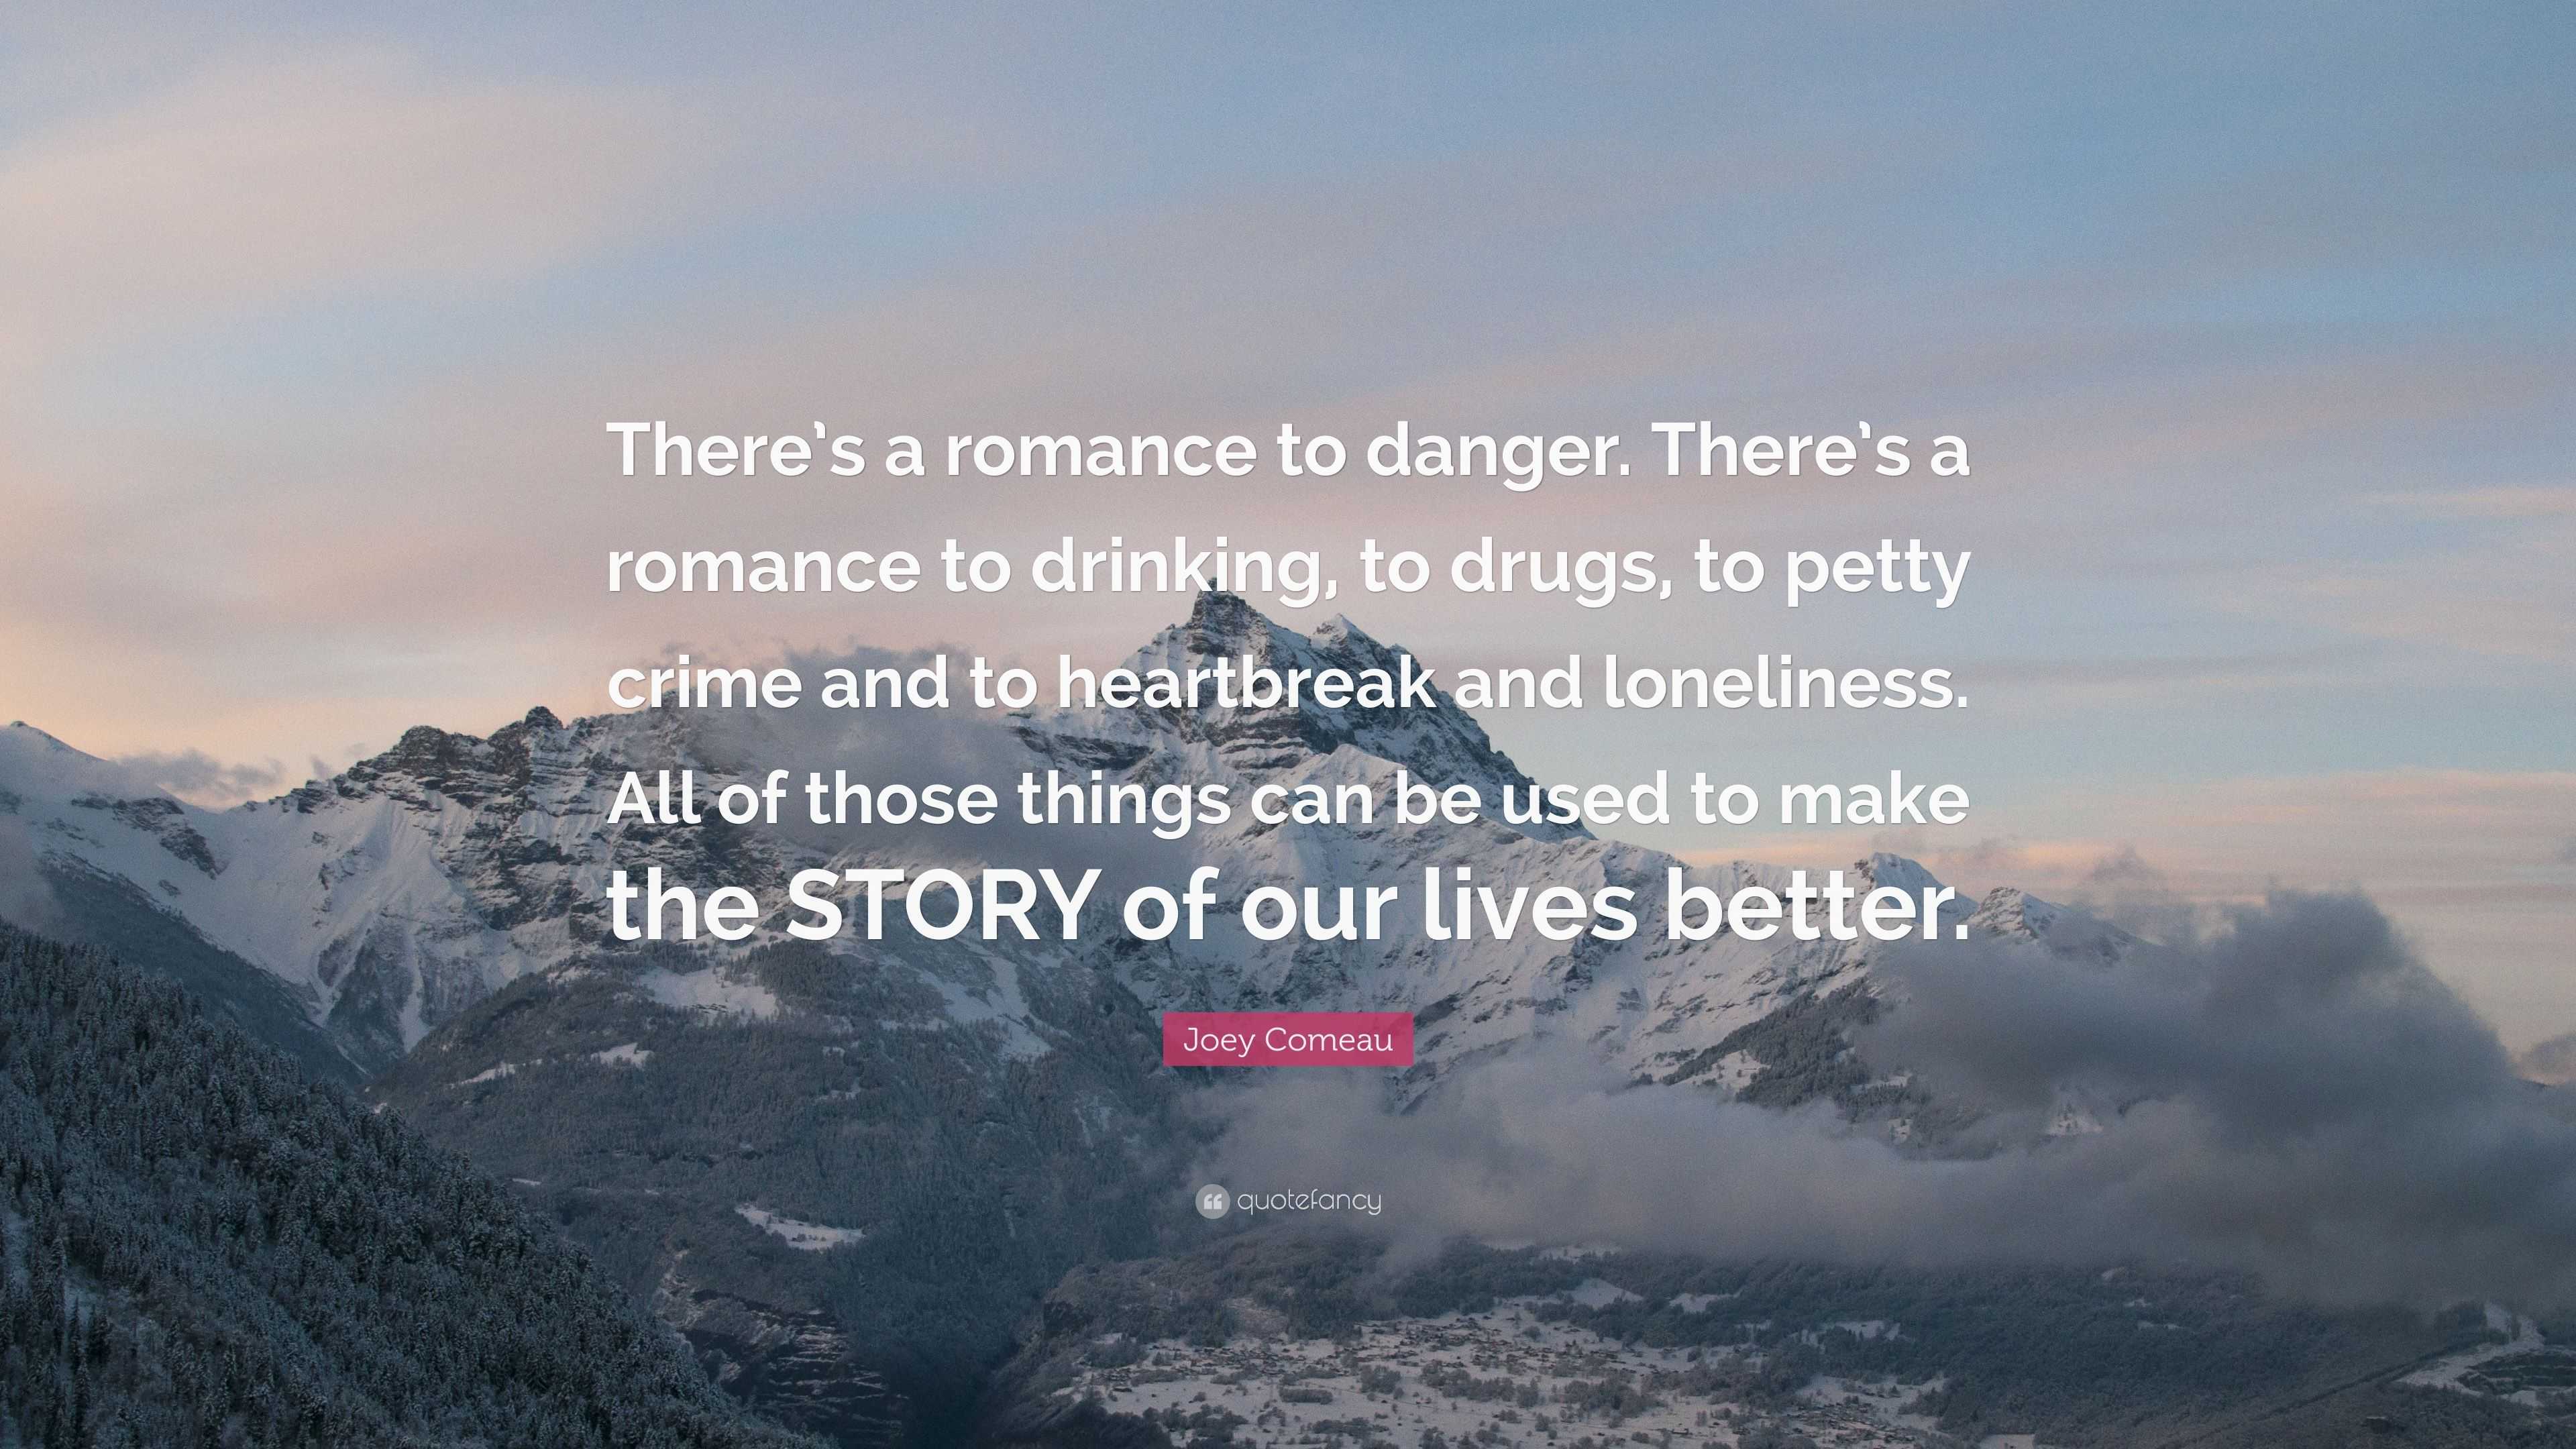 https://quotefancy.com/media/wallpaper/3840x2160/3115650-Joey-Comeau-Quote-There-s-a-romance-to-danger-There-s-a-romance-to.jpg